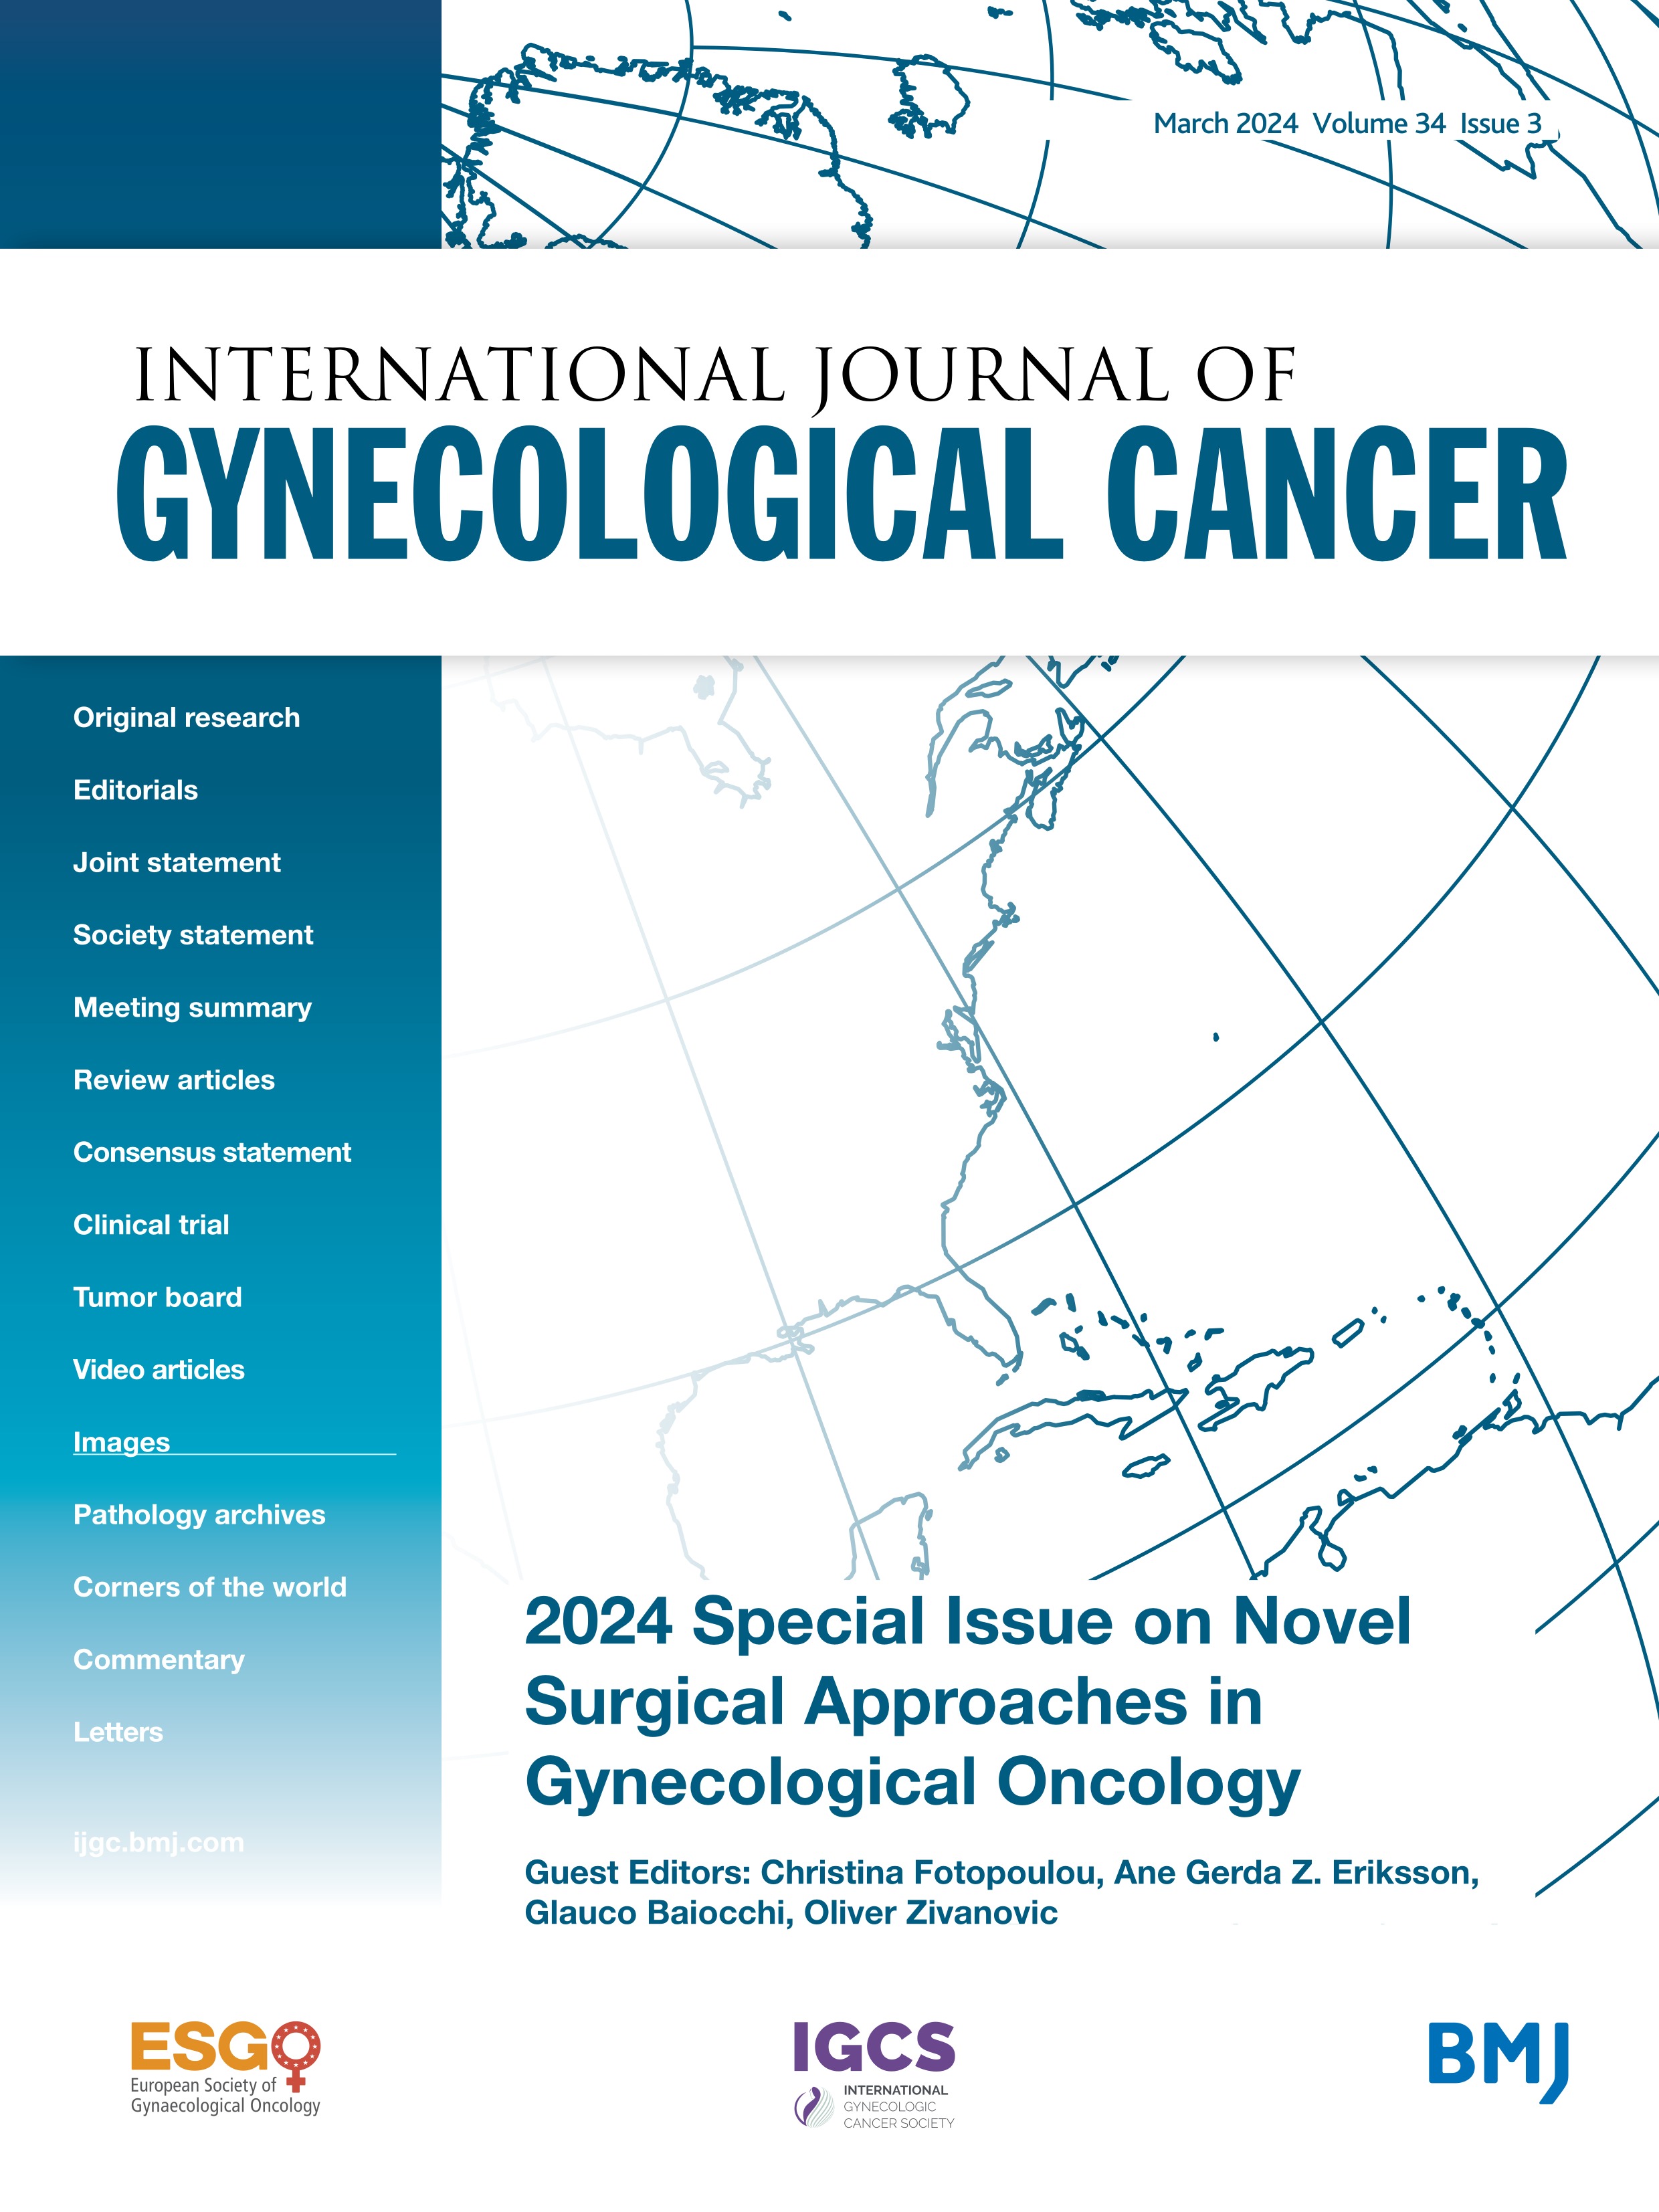 Staging by imaging in gynecologic cancer and the role of ultrasound: an update of European joint consensus statements